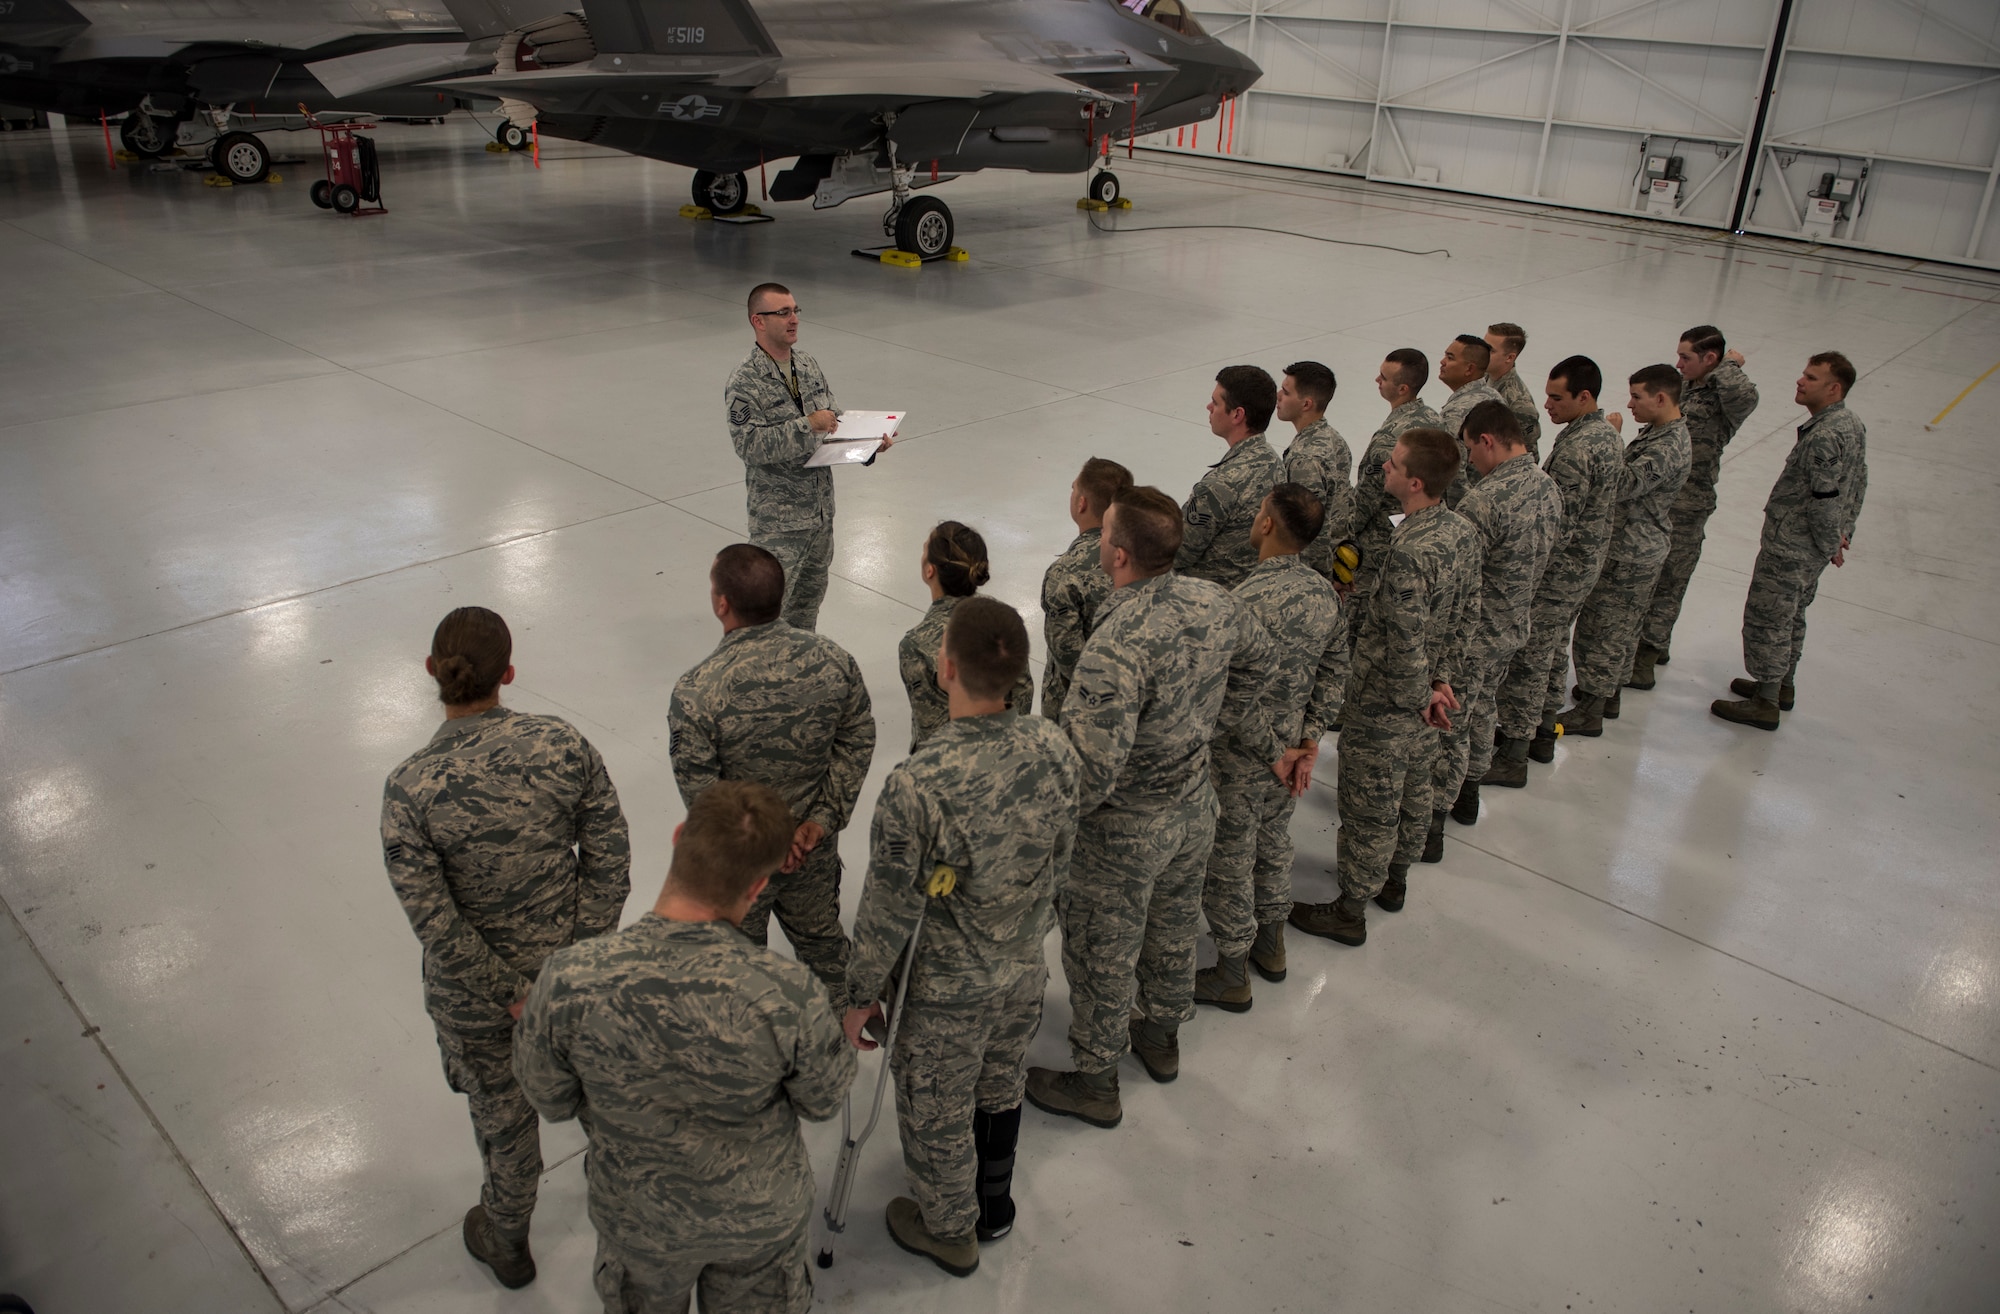 Airmen assigned to the 57th Aircraft Maintenance Squadron Lightning Aircraft Maintenance Unit line up in formation for roll call at Nellis Air Force Base, Nevada, July 24, 2018. Airmen must attend roll call to get the task list for their shift. (U.S. Air Force photo by Airman 1st Class Andrew D. Sarver)